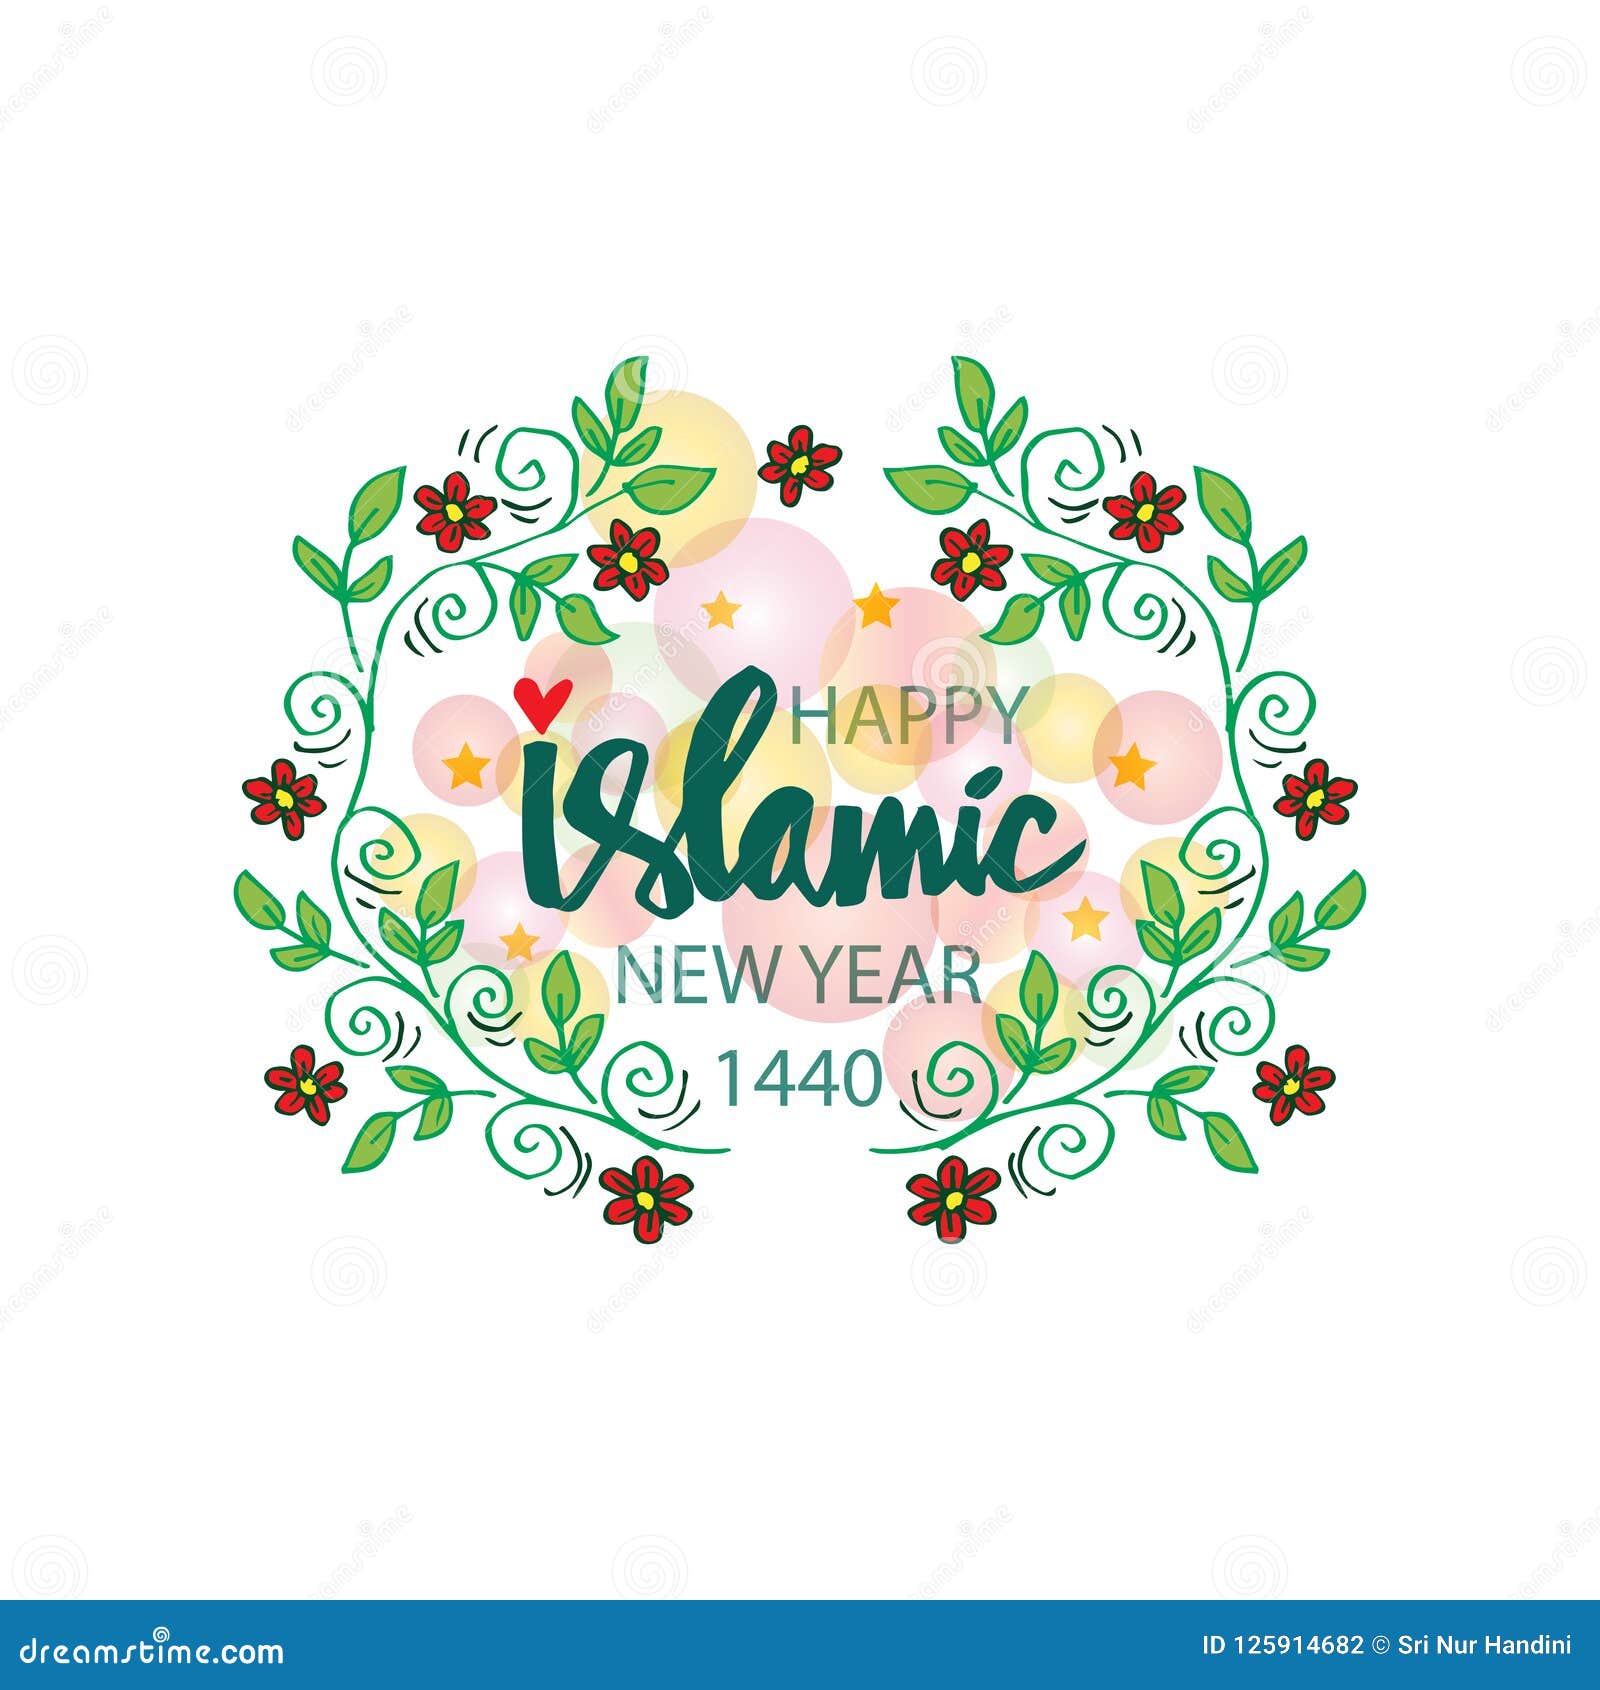 Happy Islamic New Year Greeting Card. Stock Vector Illustration of